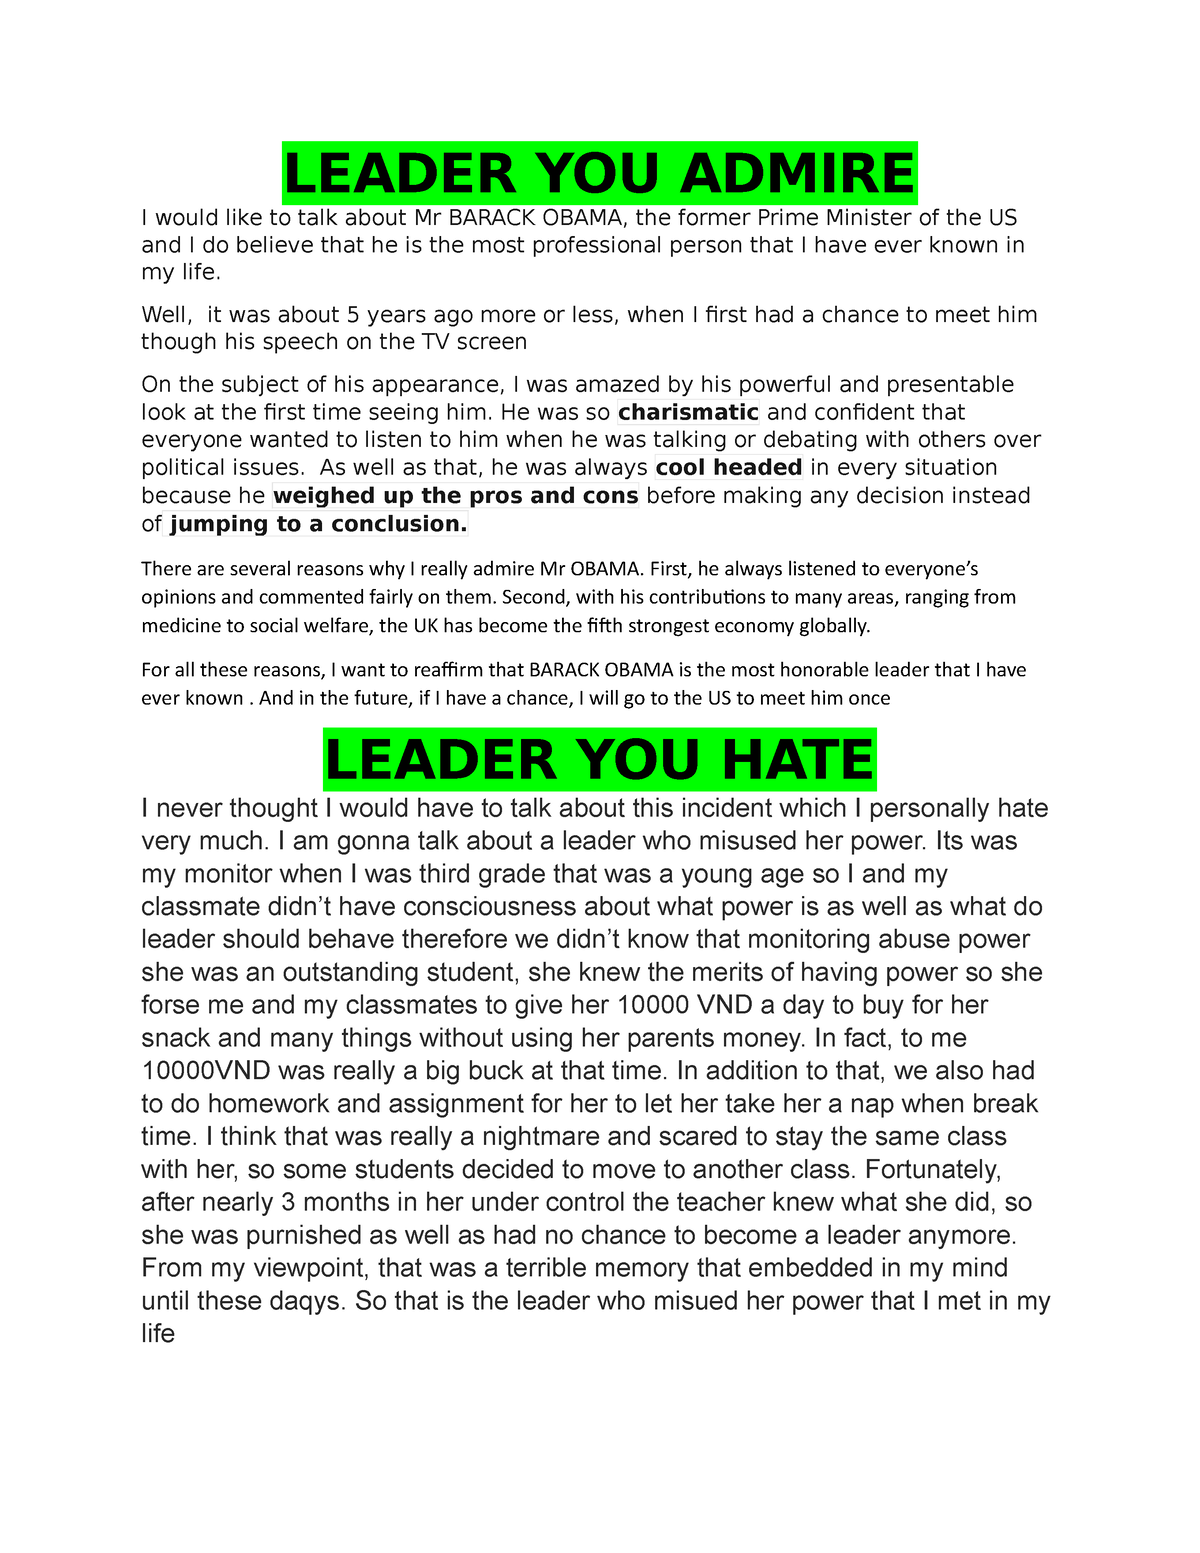 essay about a leader you admire